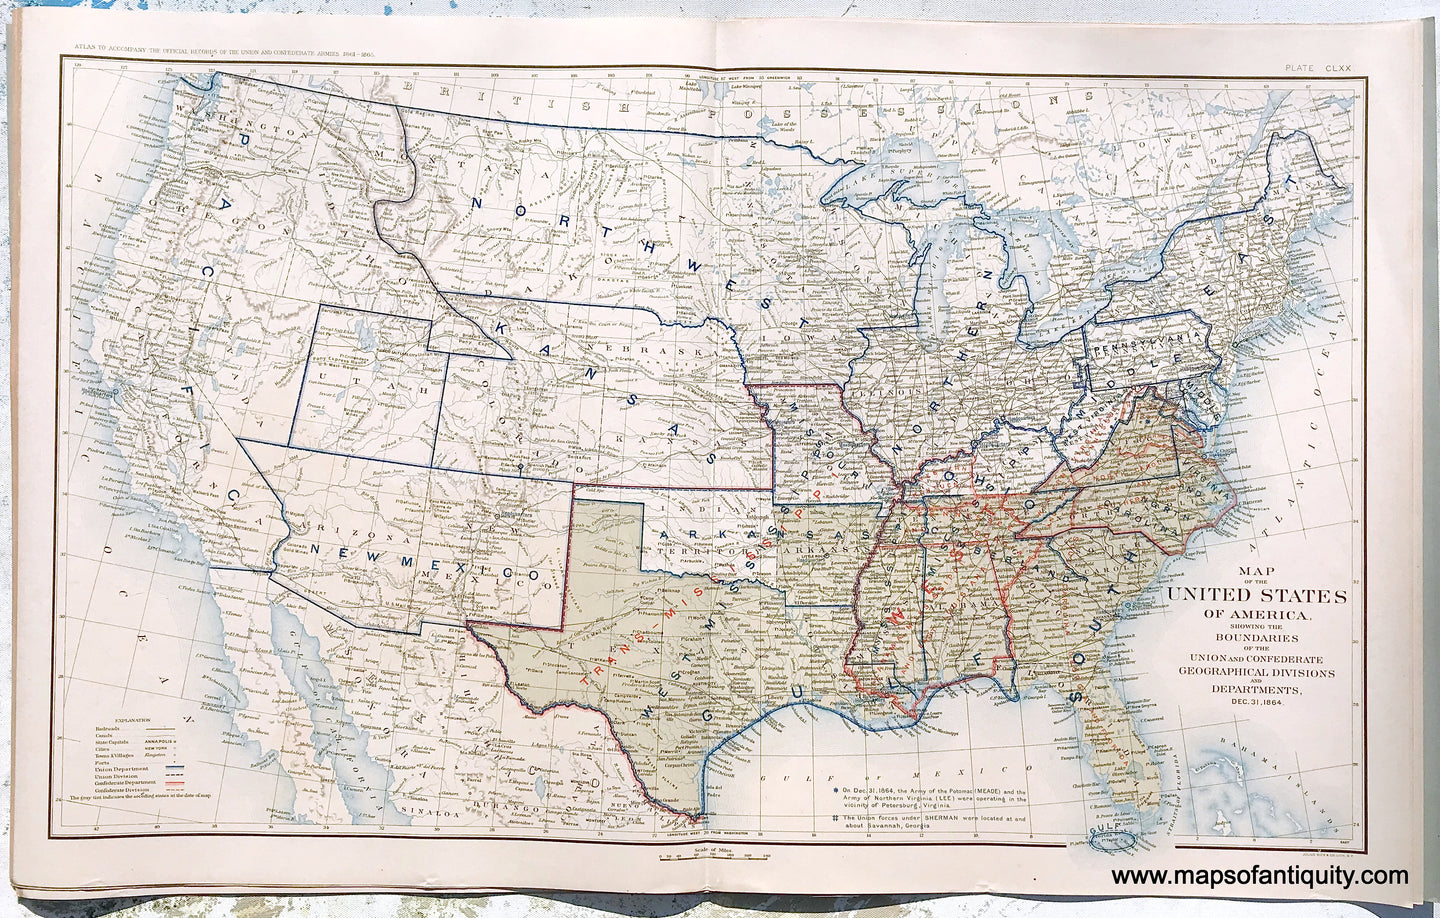 Antique-Lithograph-Print-Plate-170.-The-United-States-of-America-showing-the-Boundaries-of-the-Union-and-Confederate-Geographical-Divisions-and-Departments-December-31-1864.-1895-US-War-Dept.-Civil-War-Civil-War-1800s-19th-century-Maps-of-Antiquity